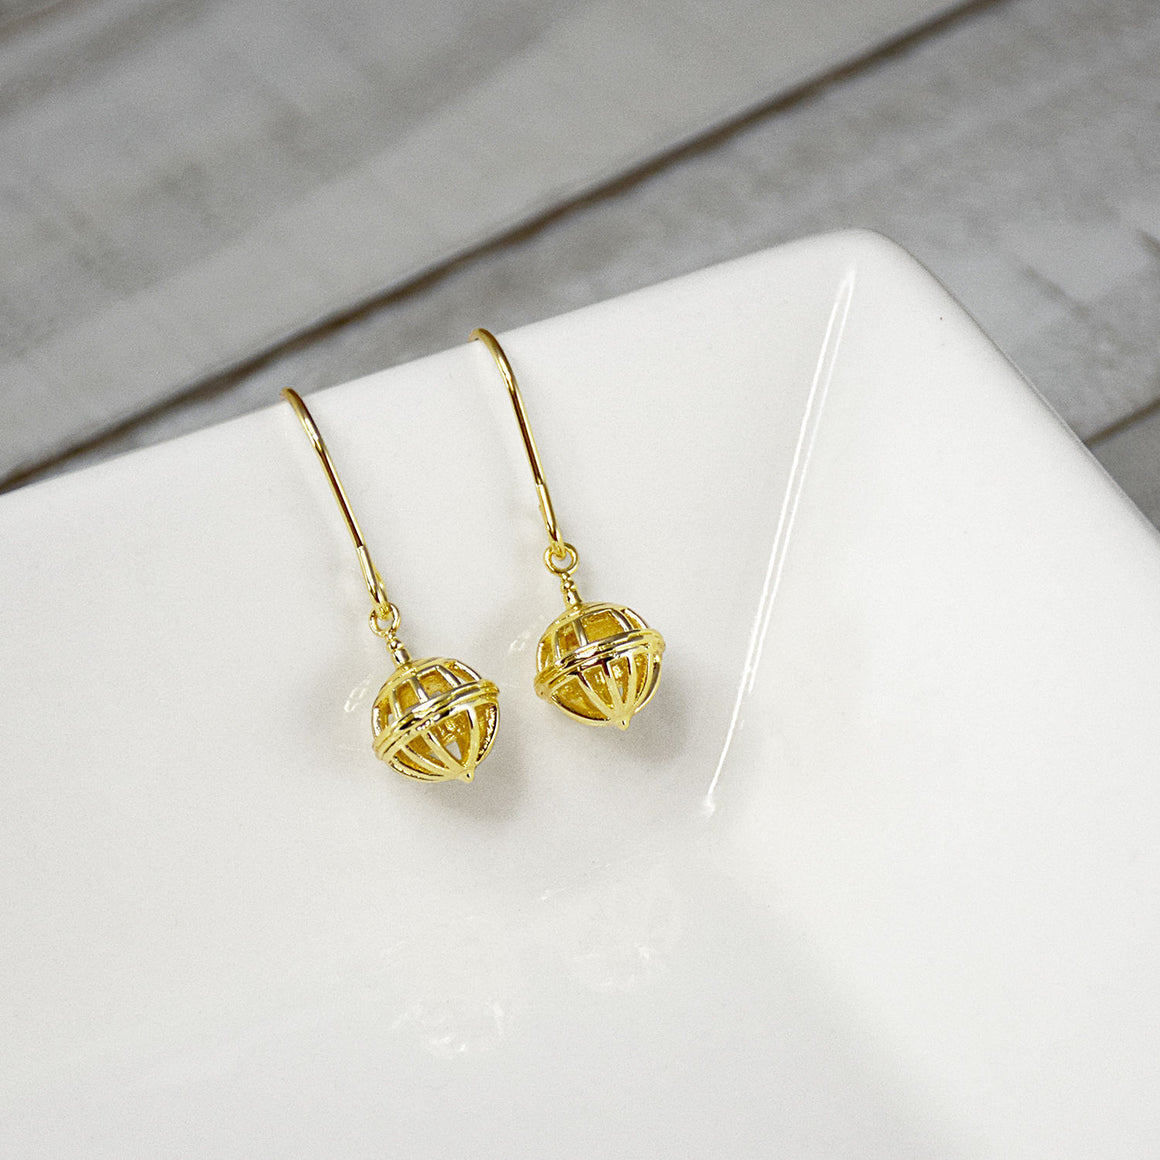 Liahona Gold 3D Earrings on Surgical Stainless Steel Posts